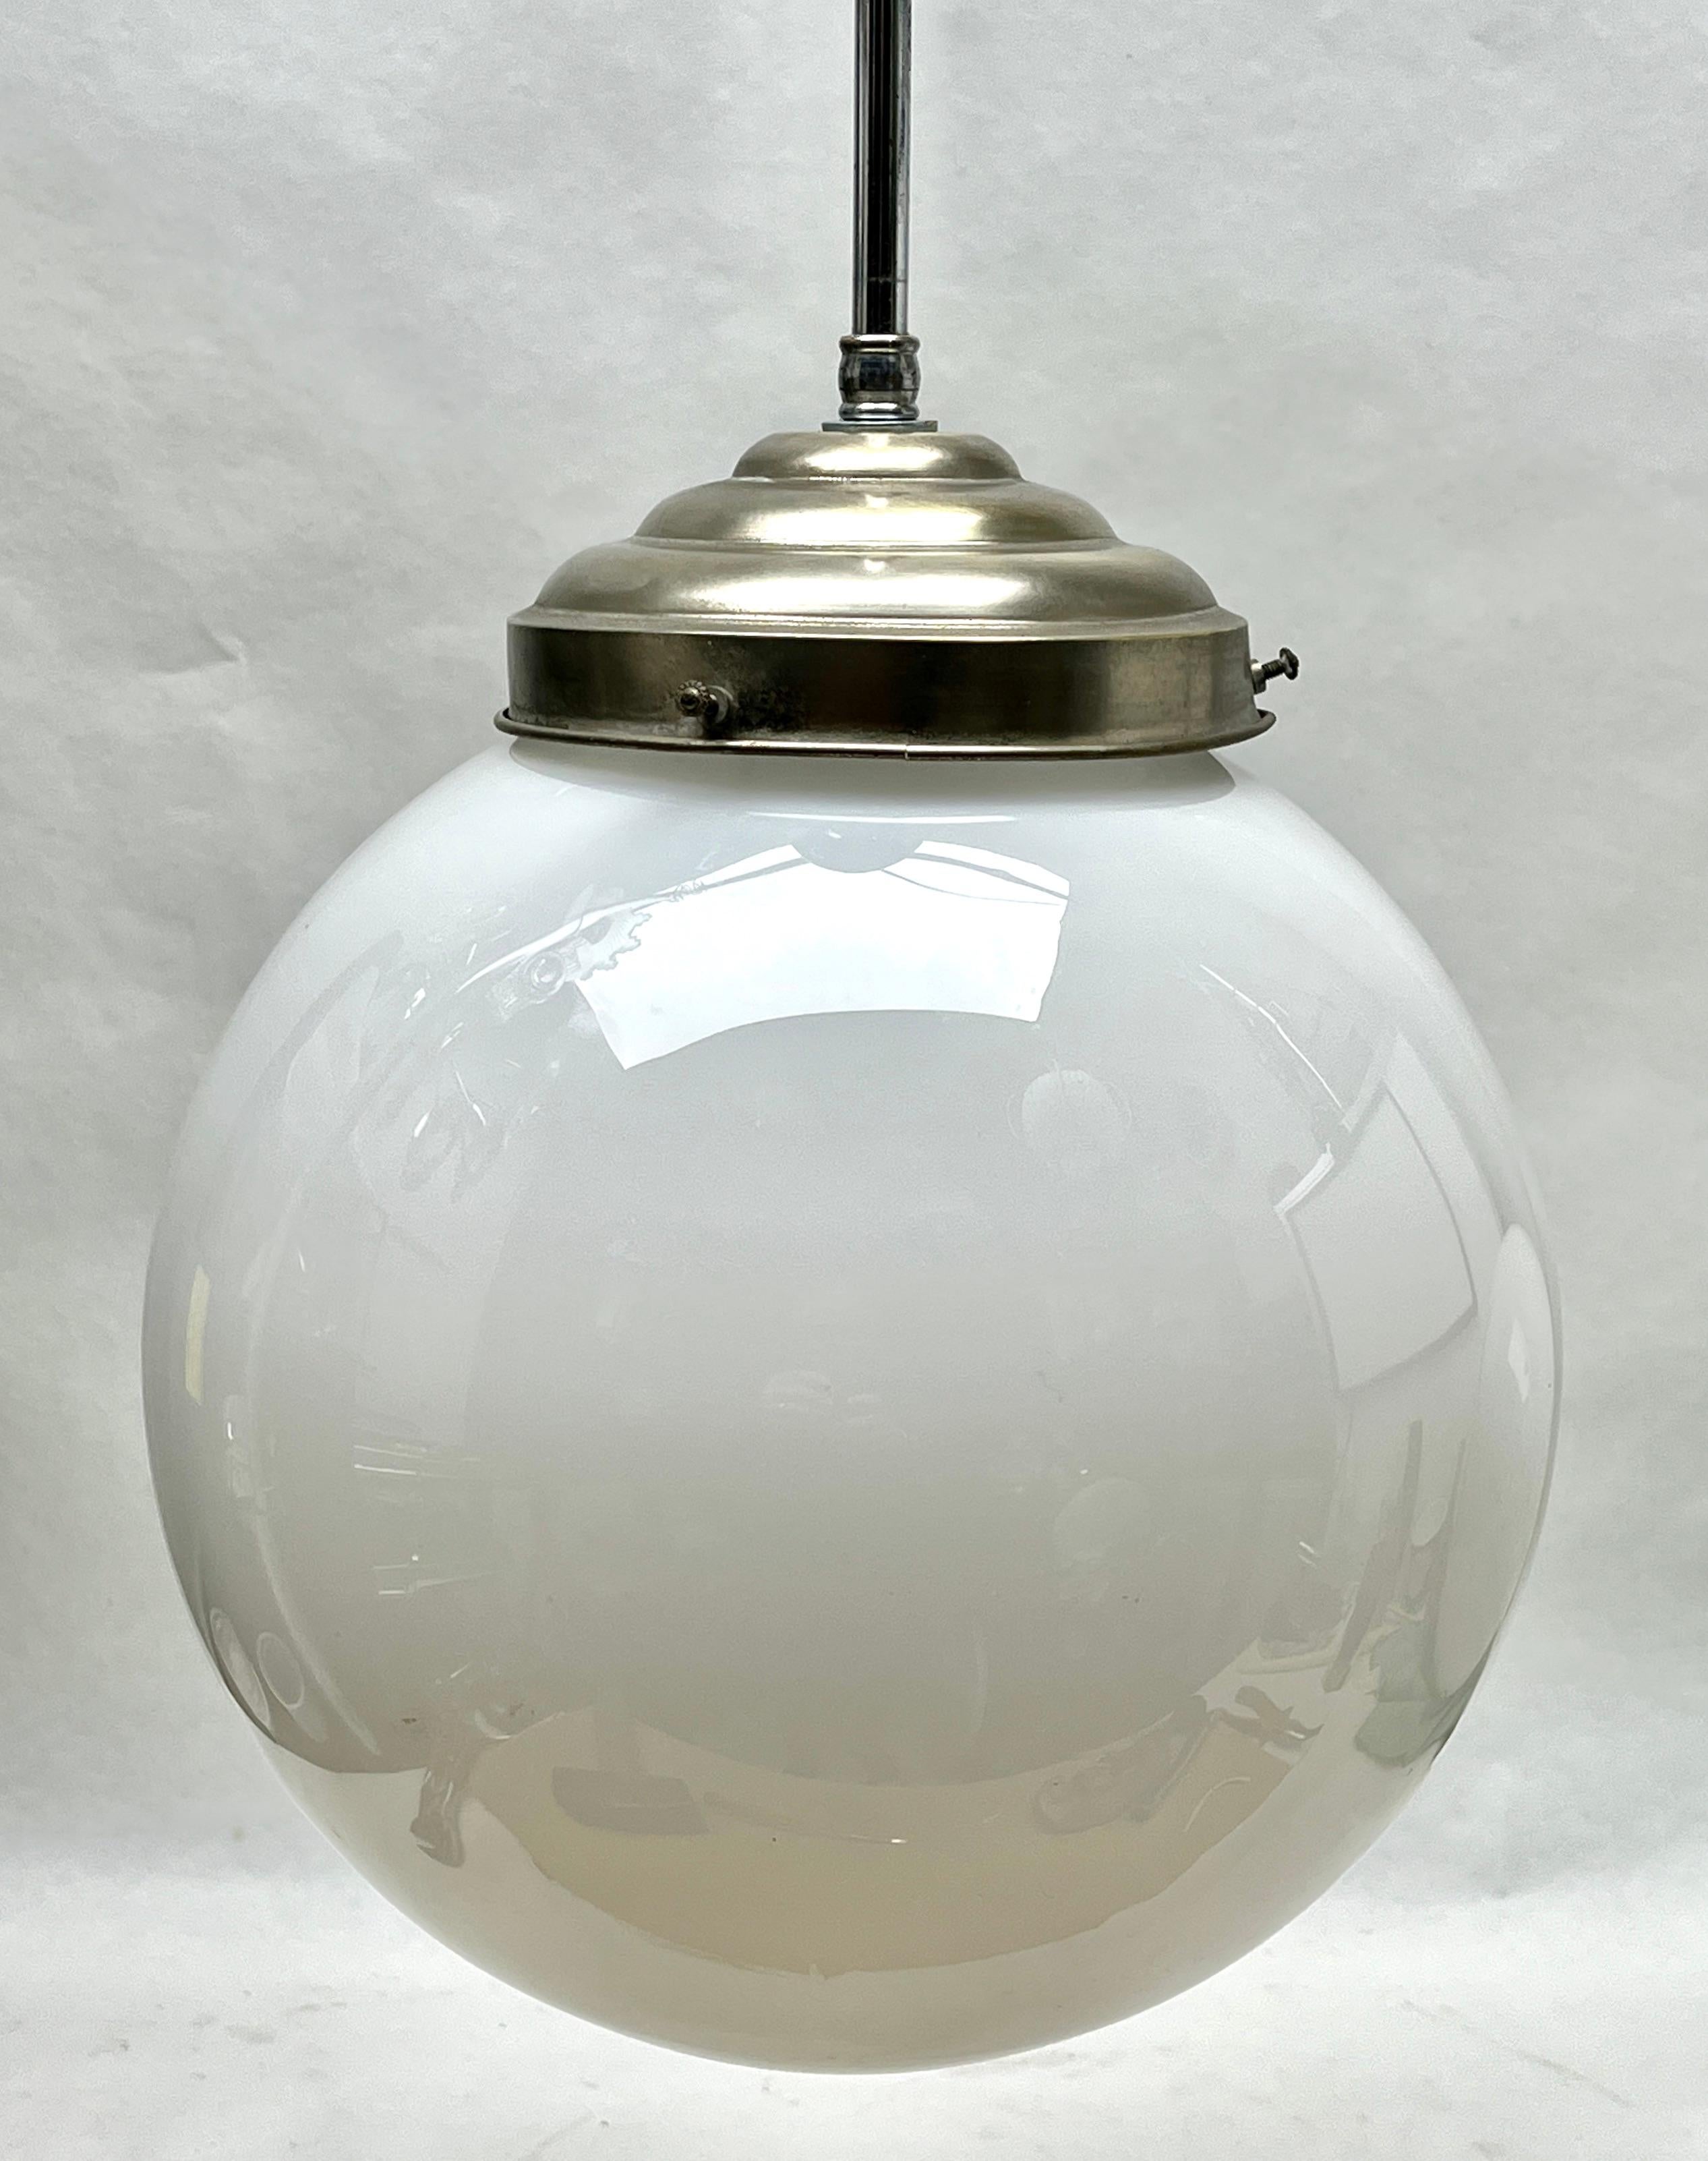 From the range by the Phillips Company, this center-light on a central chromed stem. 
The lamp has a fitting on a chromed plate and holds a round globular shade of opaline glass.

In good condition and in full working order with standard lamp